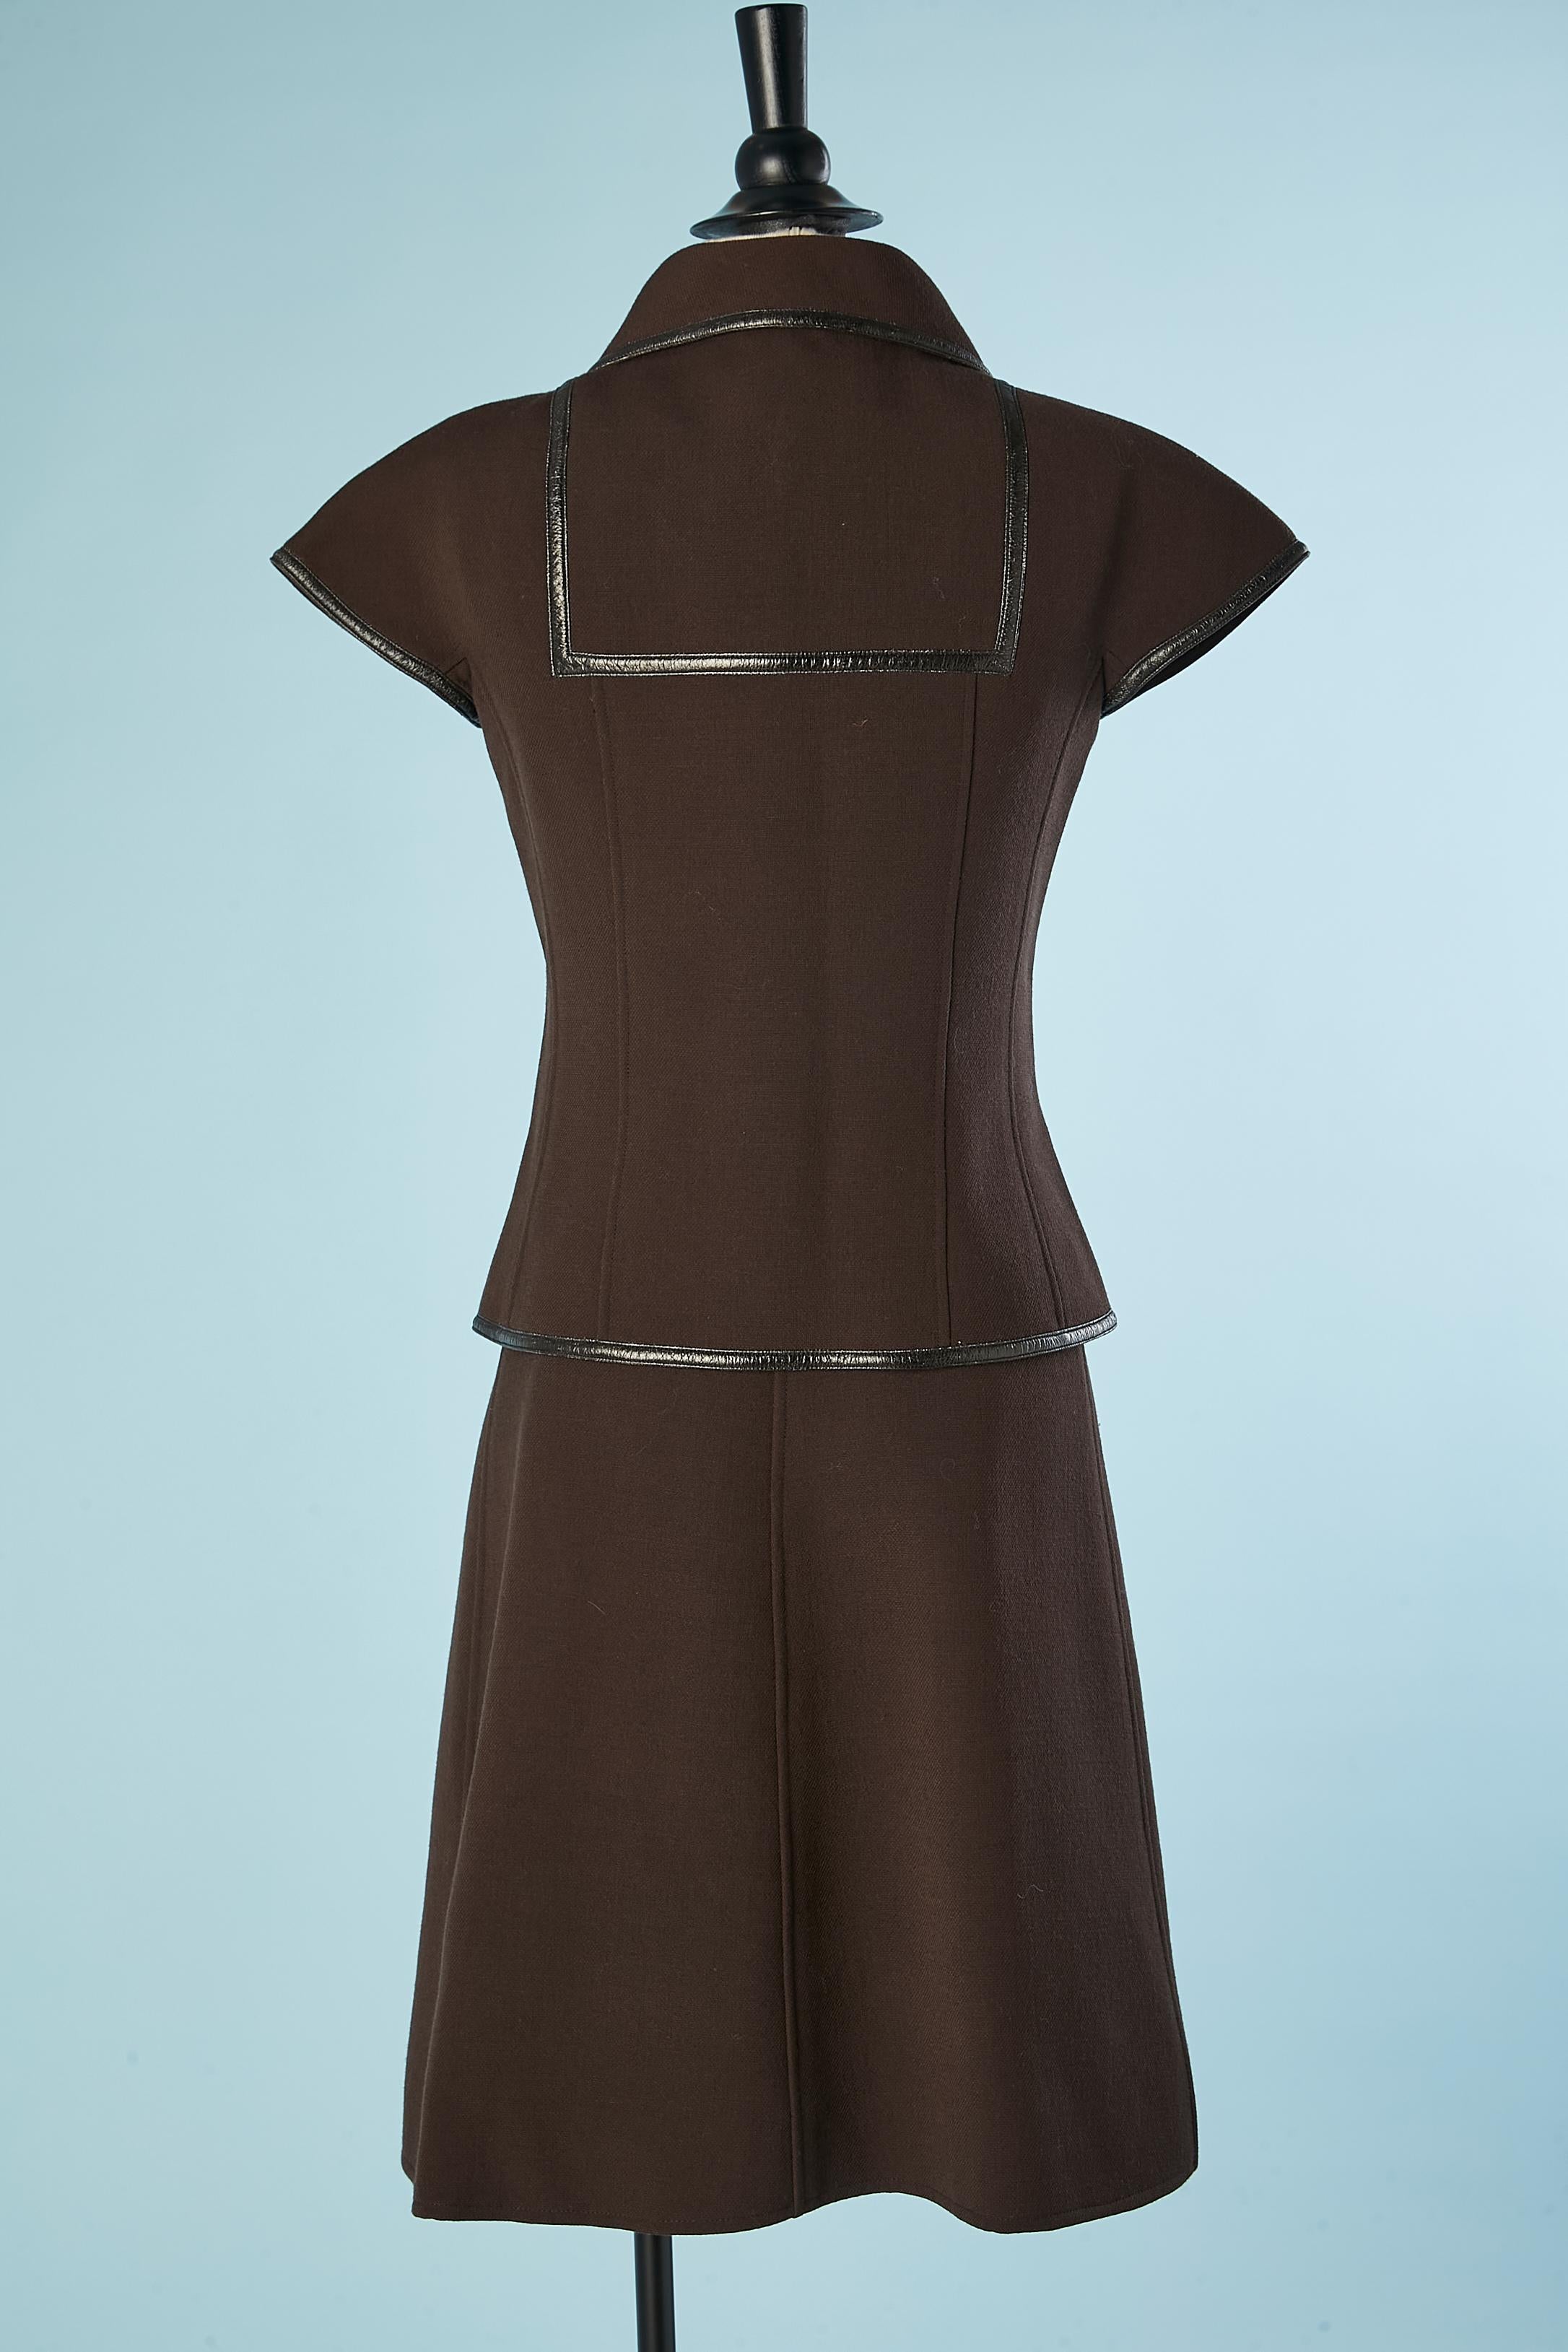 Women's Brown wool skirt-suit and black piping Courrèges Paris Couture Future Circa 1970 For Sale